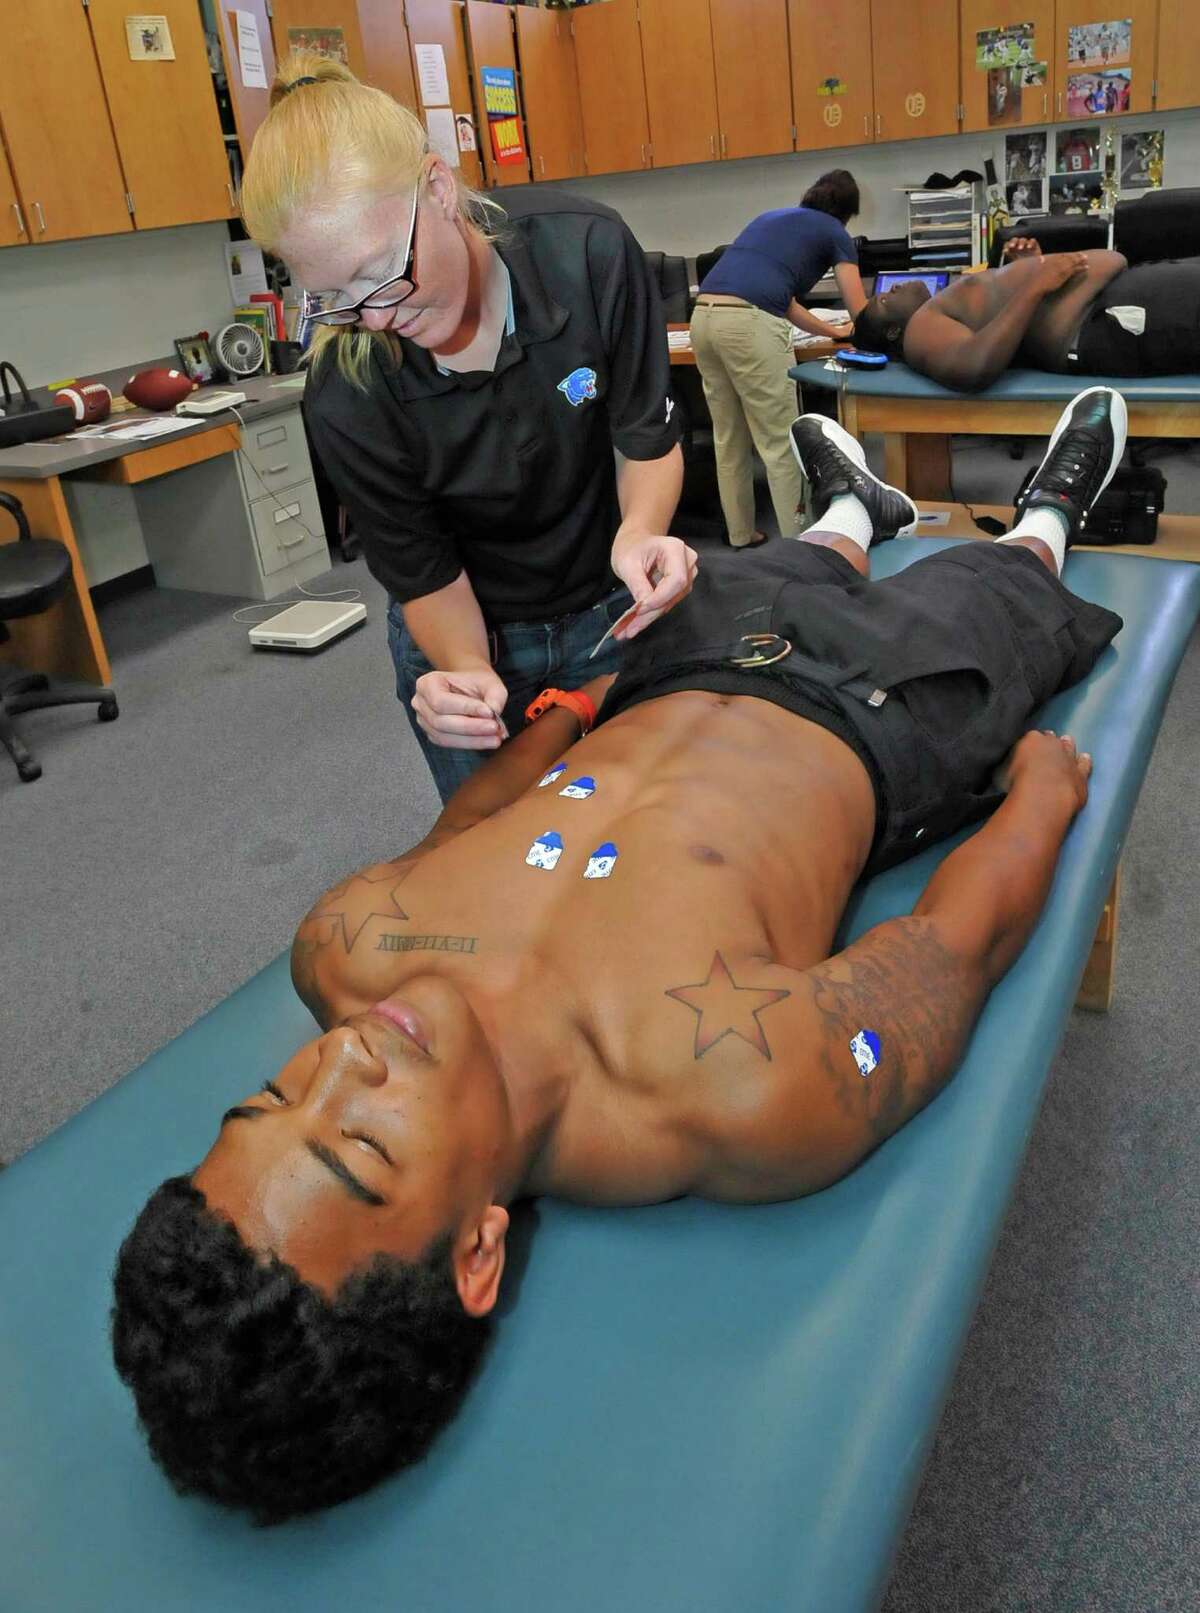 The coaches office was one of the sites used by Danae Tuhn, left, the Ozen Trainer, and Mary DeBauche, back, the Director of Operations for Cypress ECG as the two each hooked up one athlete at a time to the EKG transmitters that sent information to a computer. Tuhn was busy hooking up Ronnie Ceasar. The Beaumont Independent School District provided EKGs for athletes at Ozen High School on Thursday at the field house. The screenings are the result of a $15,000 grant and will check athletes for heart problems. The screenings will also take place at Central High School on Friday and West Brook High School on Monday. Dave Ryan/The Enterprise